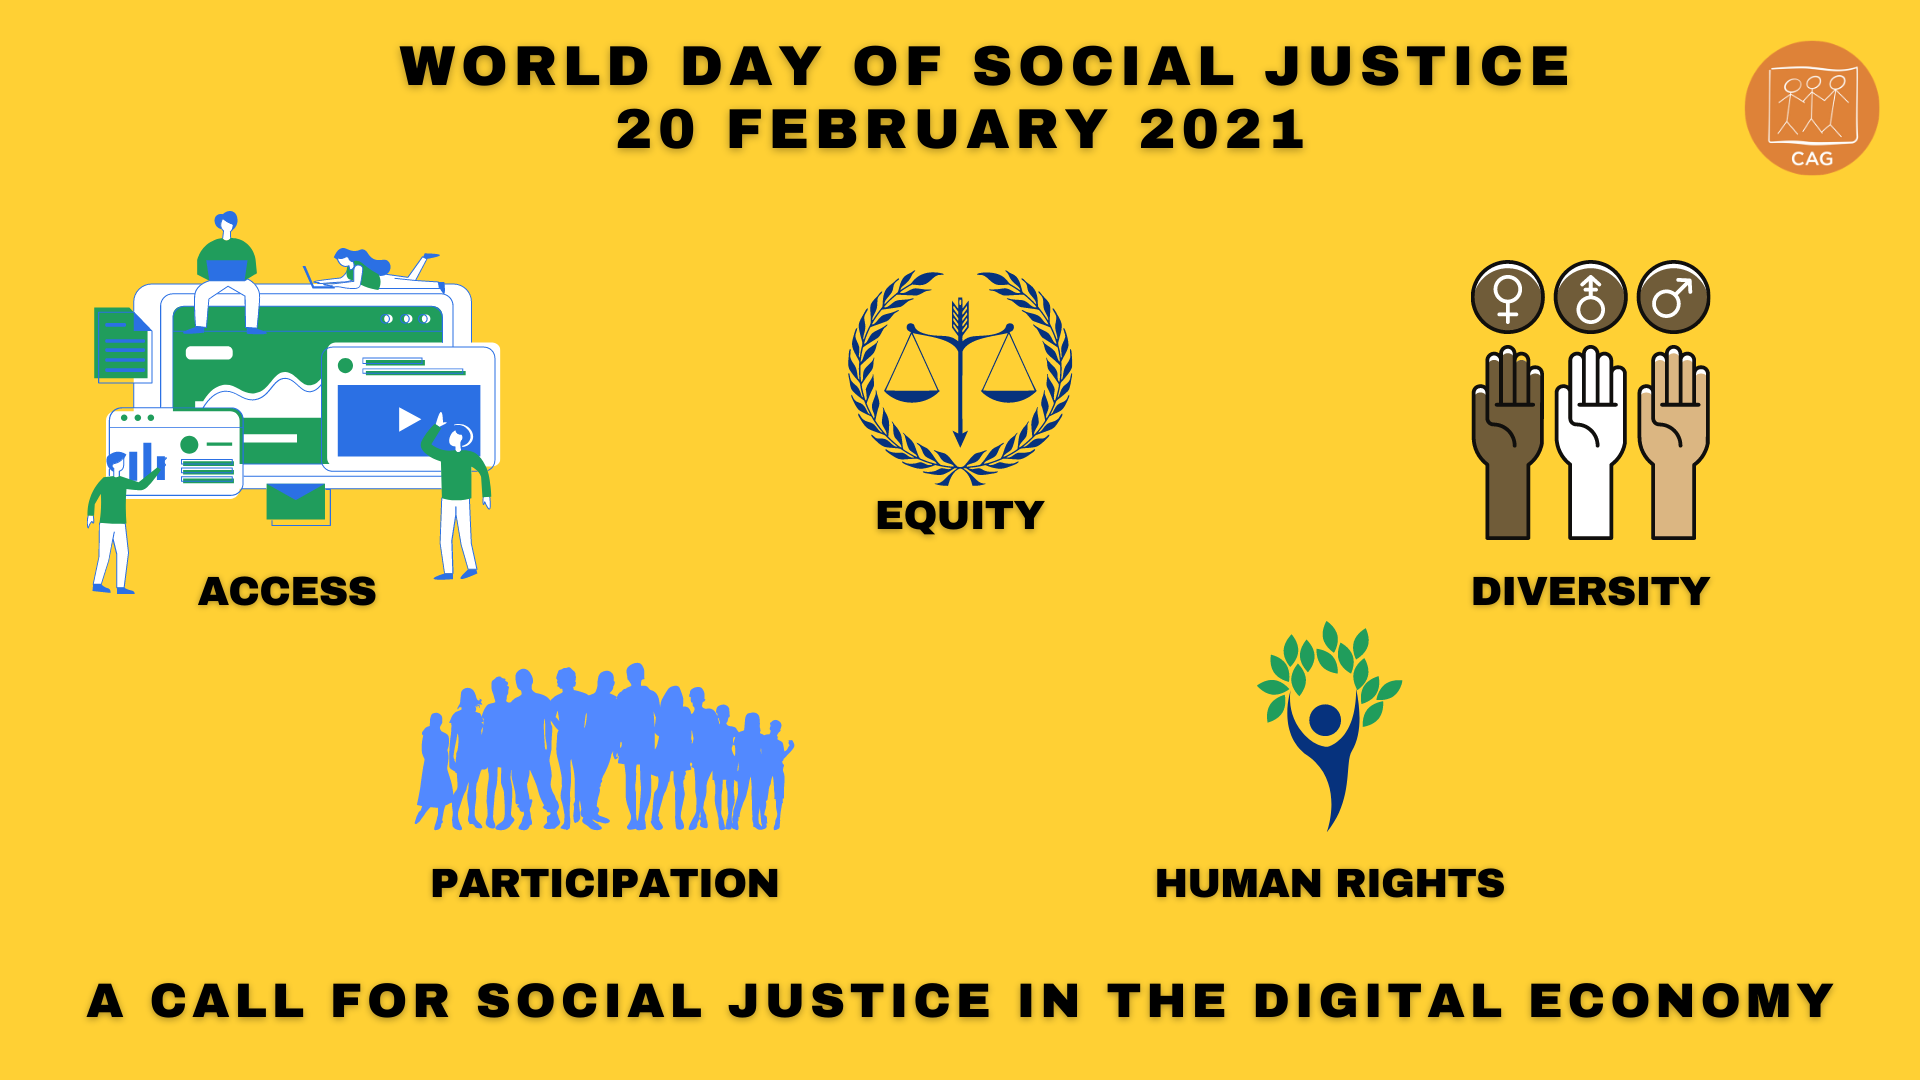 World Day of Social Justice 2021